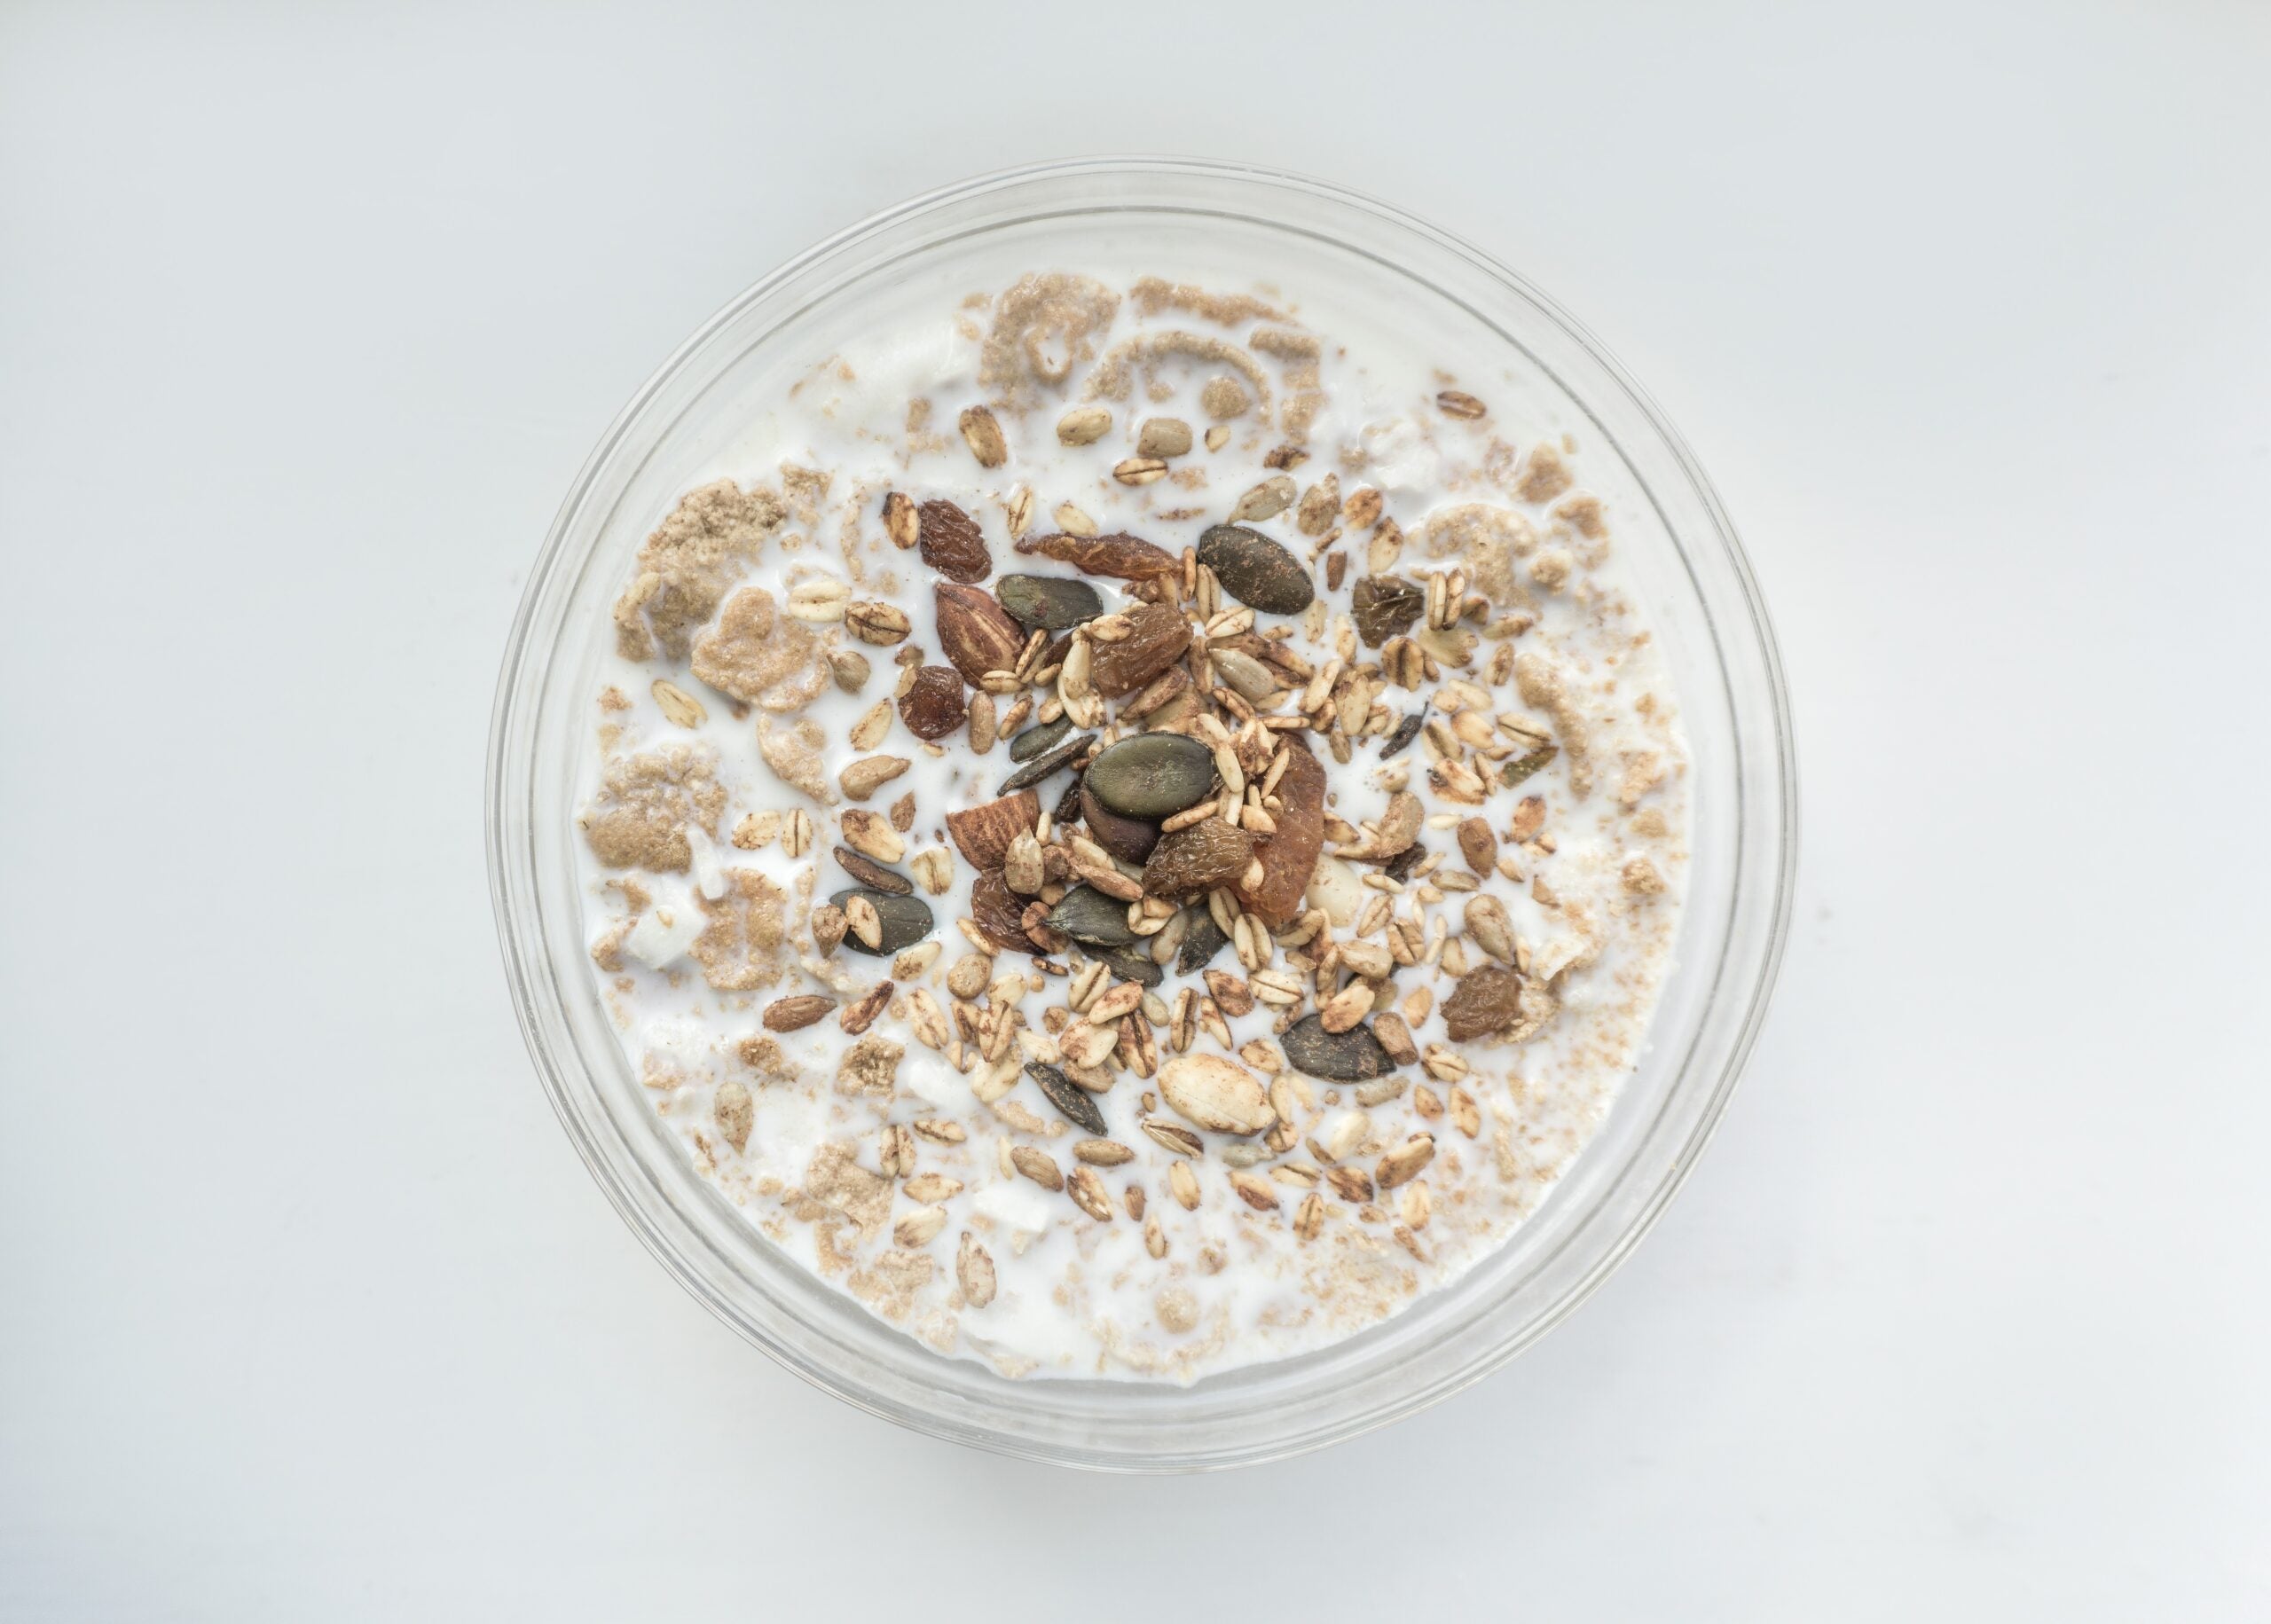 What makes gluten-free oats different from regular ones?